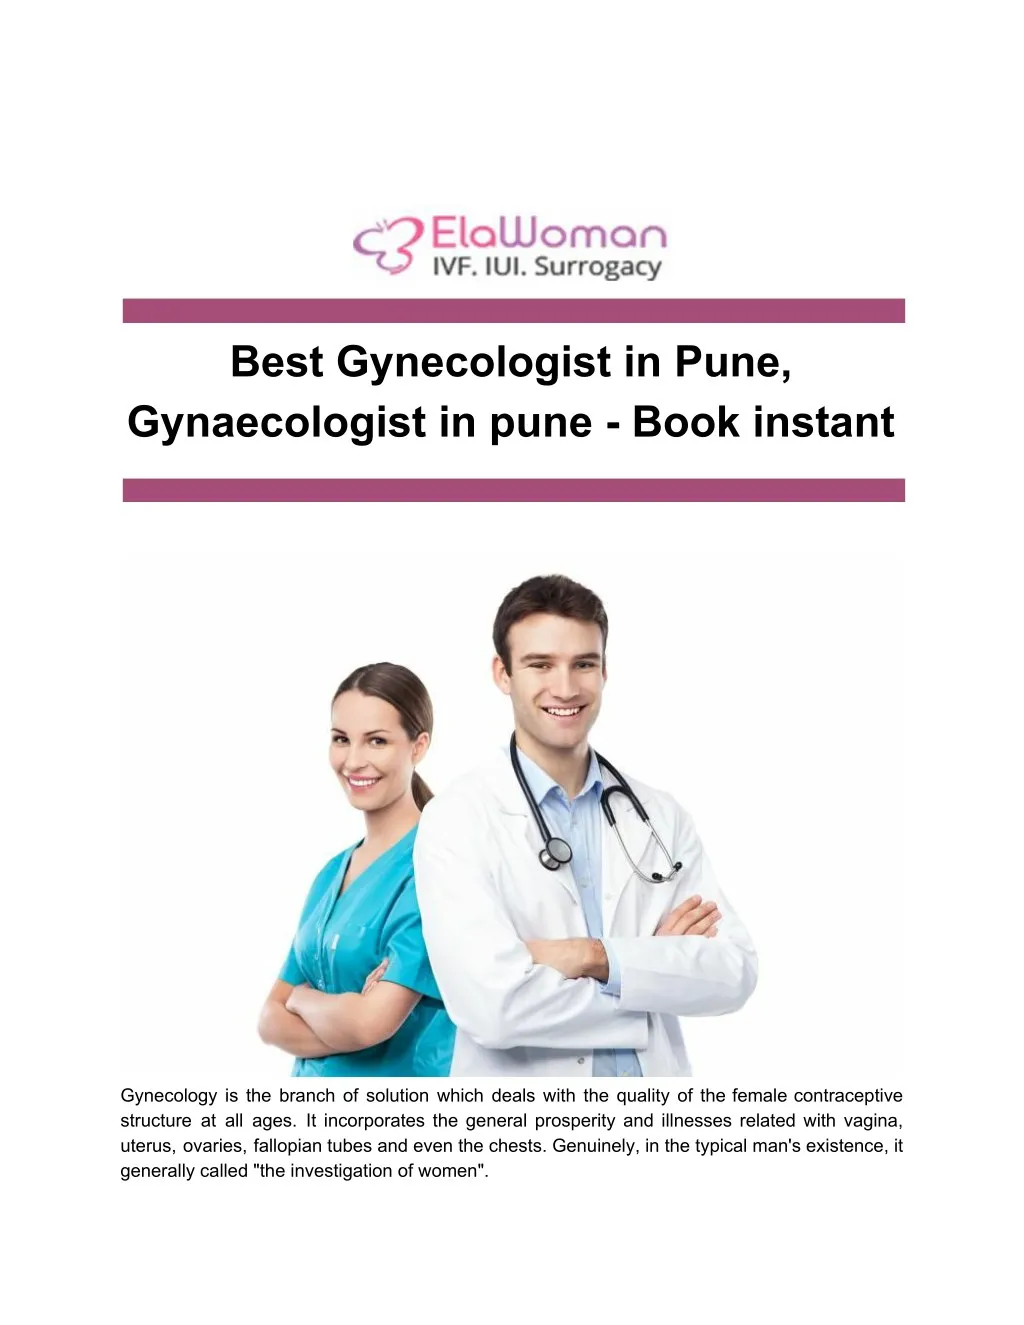 best gynecologist in pune gynaecologist in pune